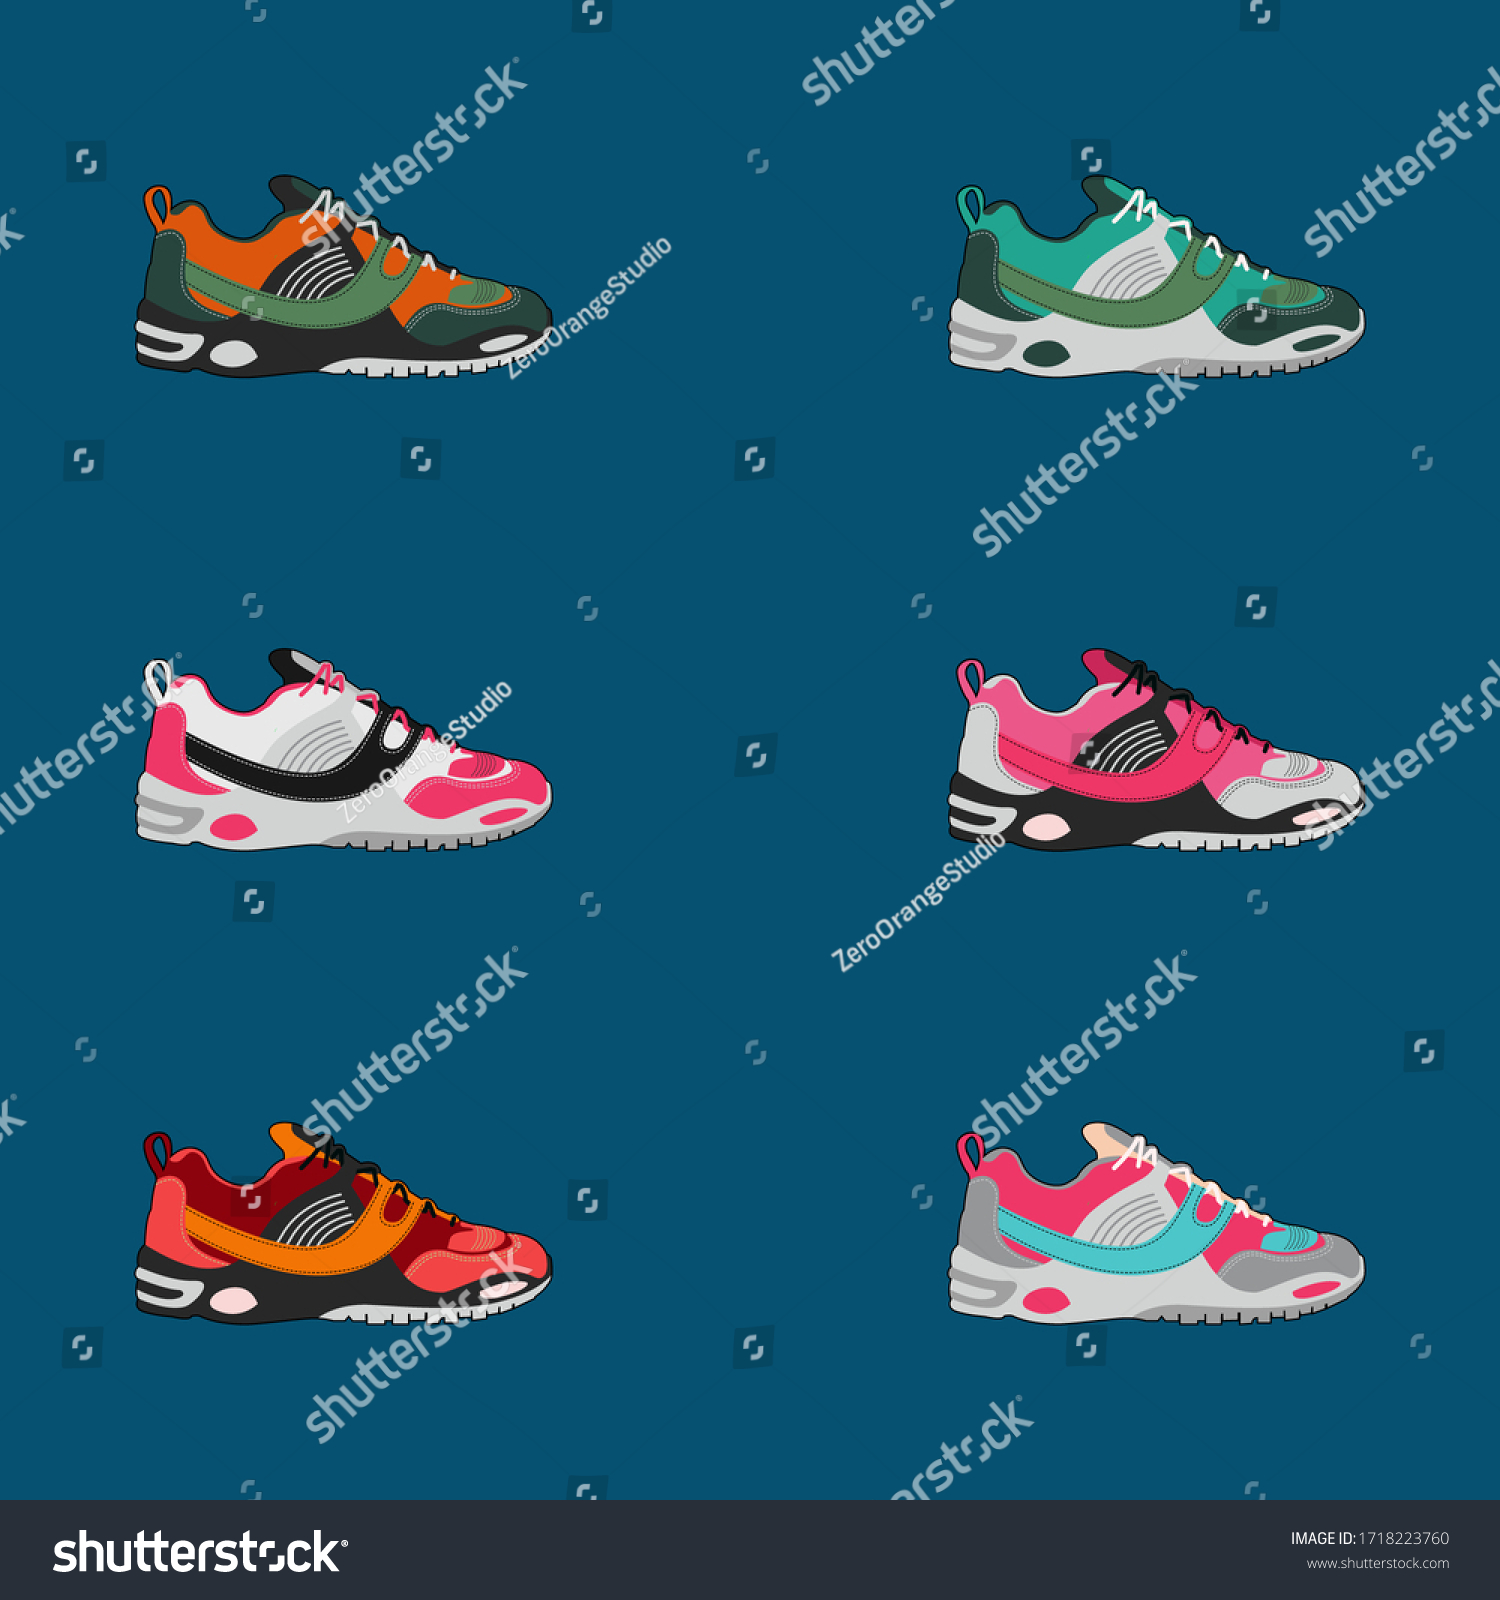 Illustration Sports Shoes Colorful Sneakers Vector Stock Vector ...